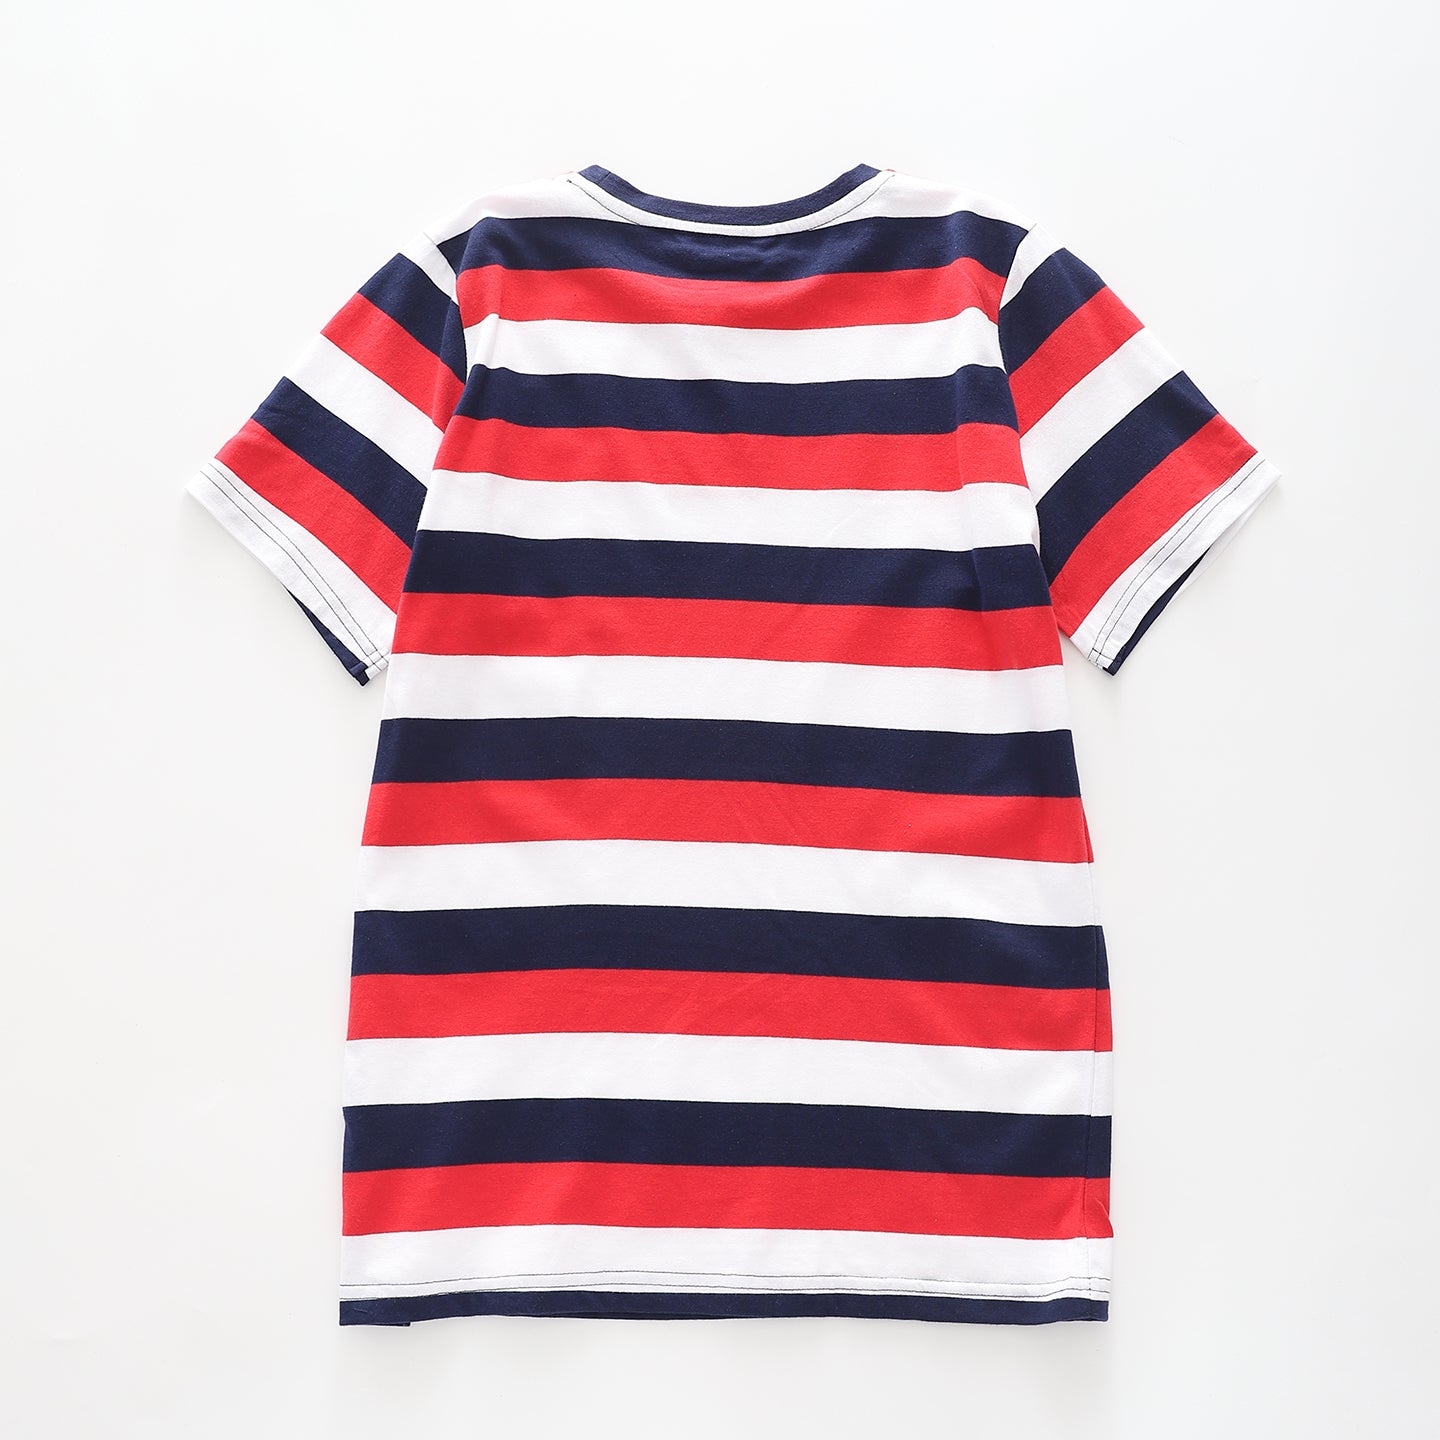 Boy's Red and Navy Blue Striped Polo Shirt